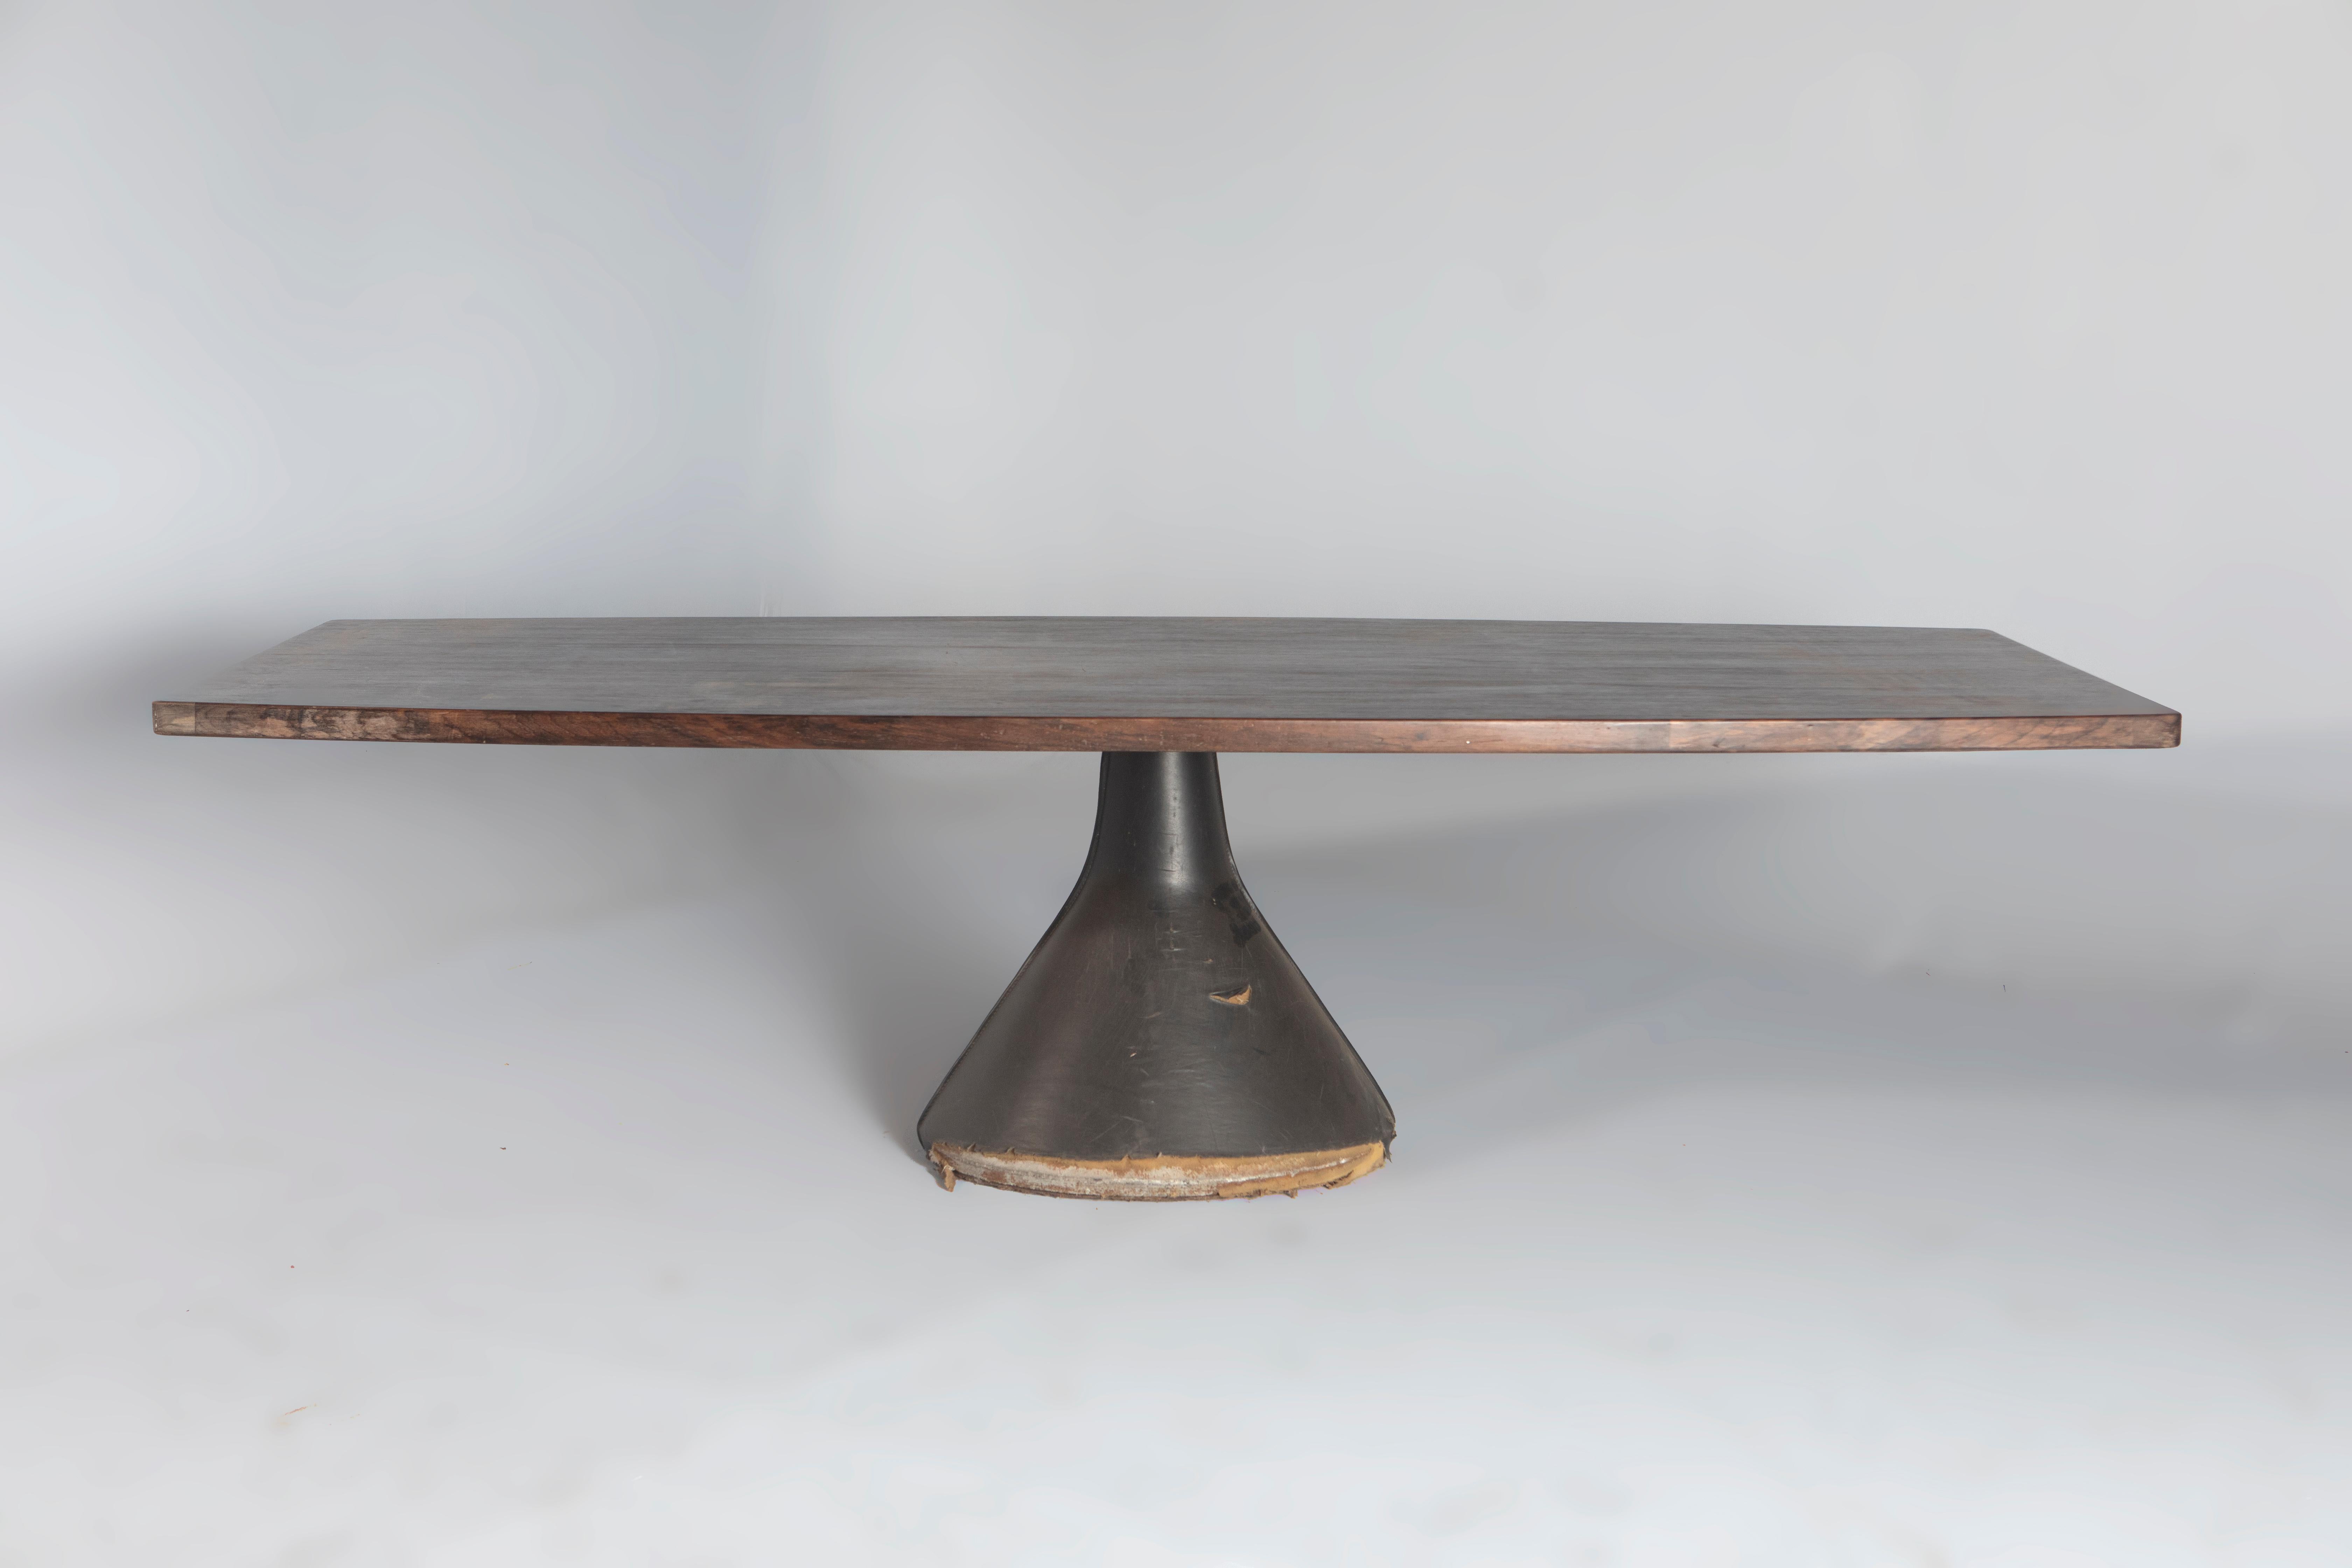 Mid-Century Modern Guanabara table by Jorge Zalszupin, Brazil, 1960s

The iconic Guanabara is a table designed by Jorge Zalszupin and produced by his company, L'atelier.
The table-top is made of wood veneer, which provides a durable and beautiful